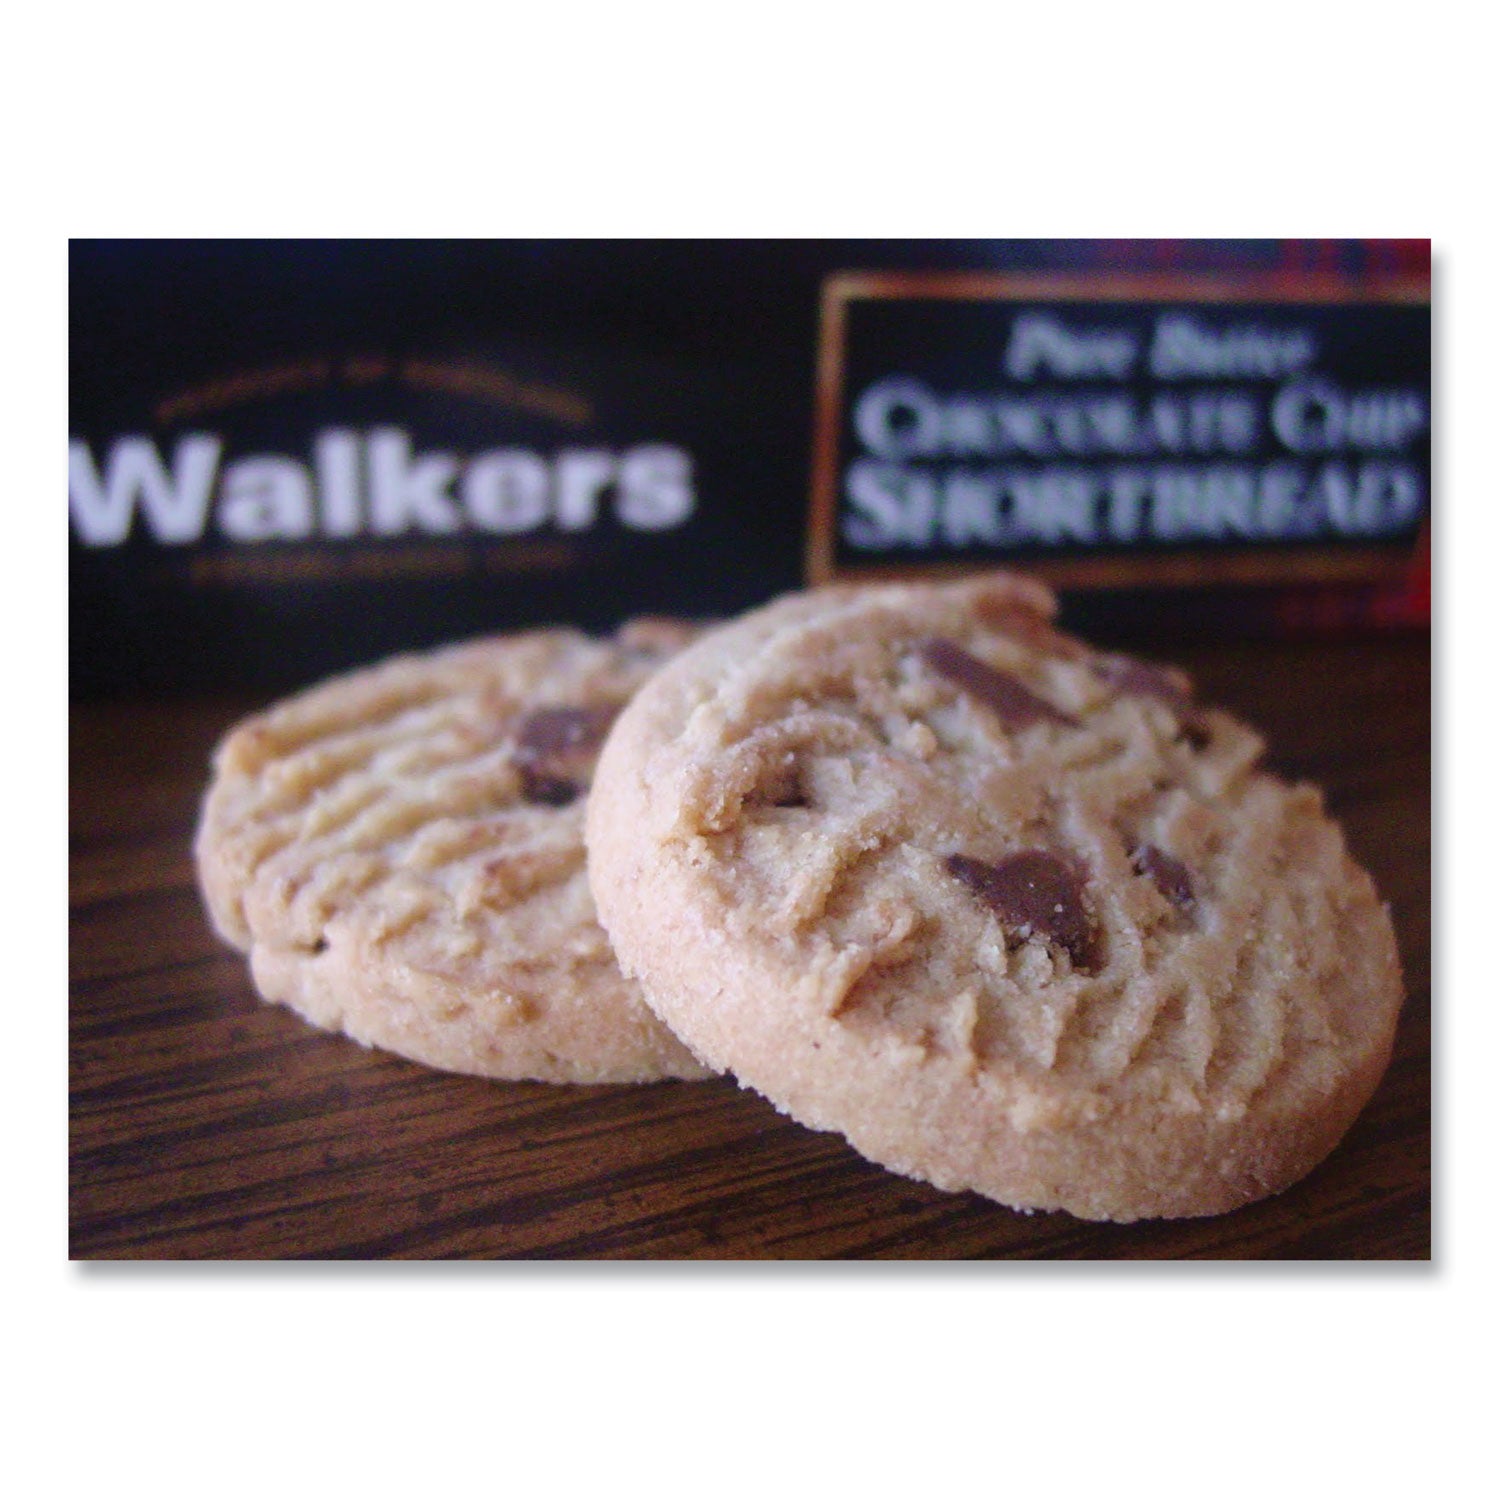 shortbread-cookies-chocolate-chip-14-oz-pack-2-pack-20-packs-box_ofx1537d - 3